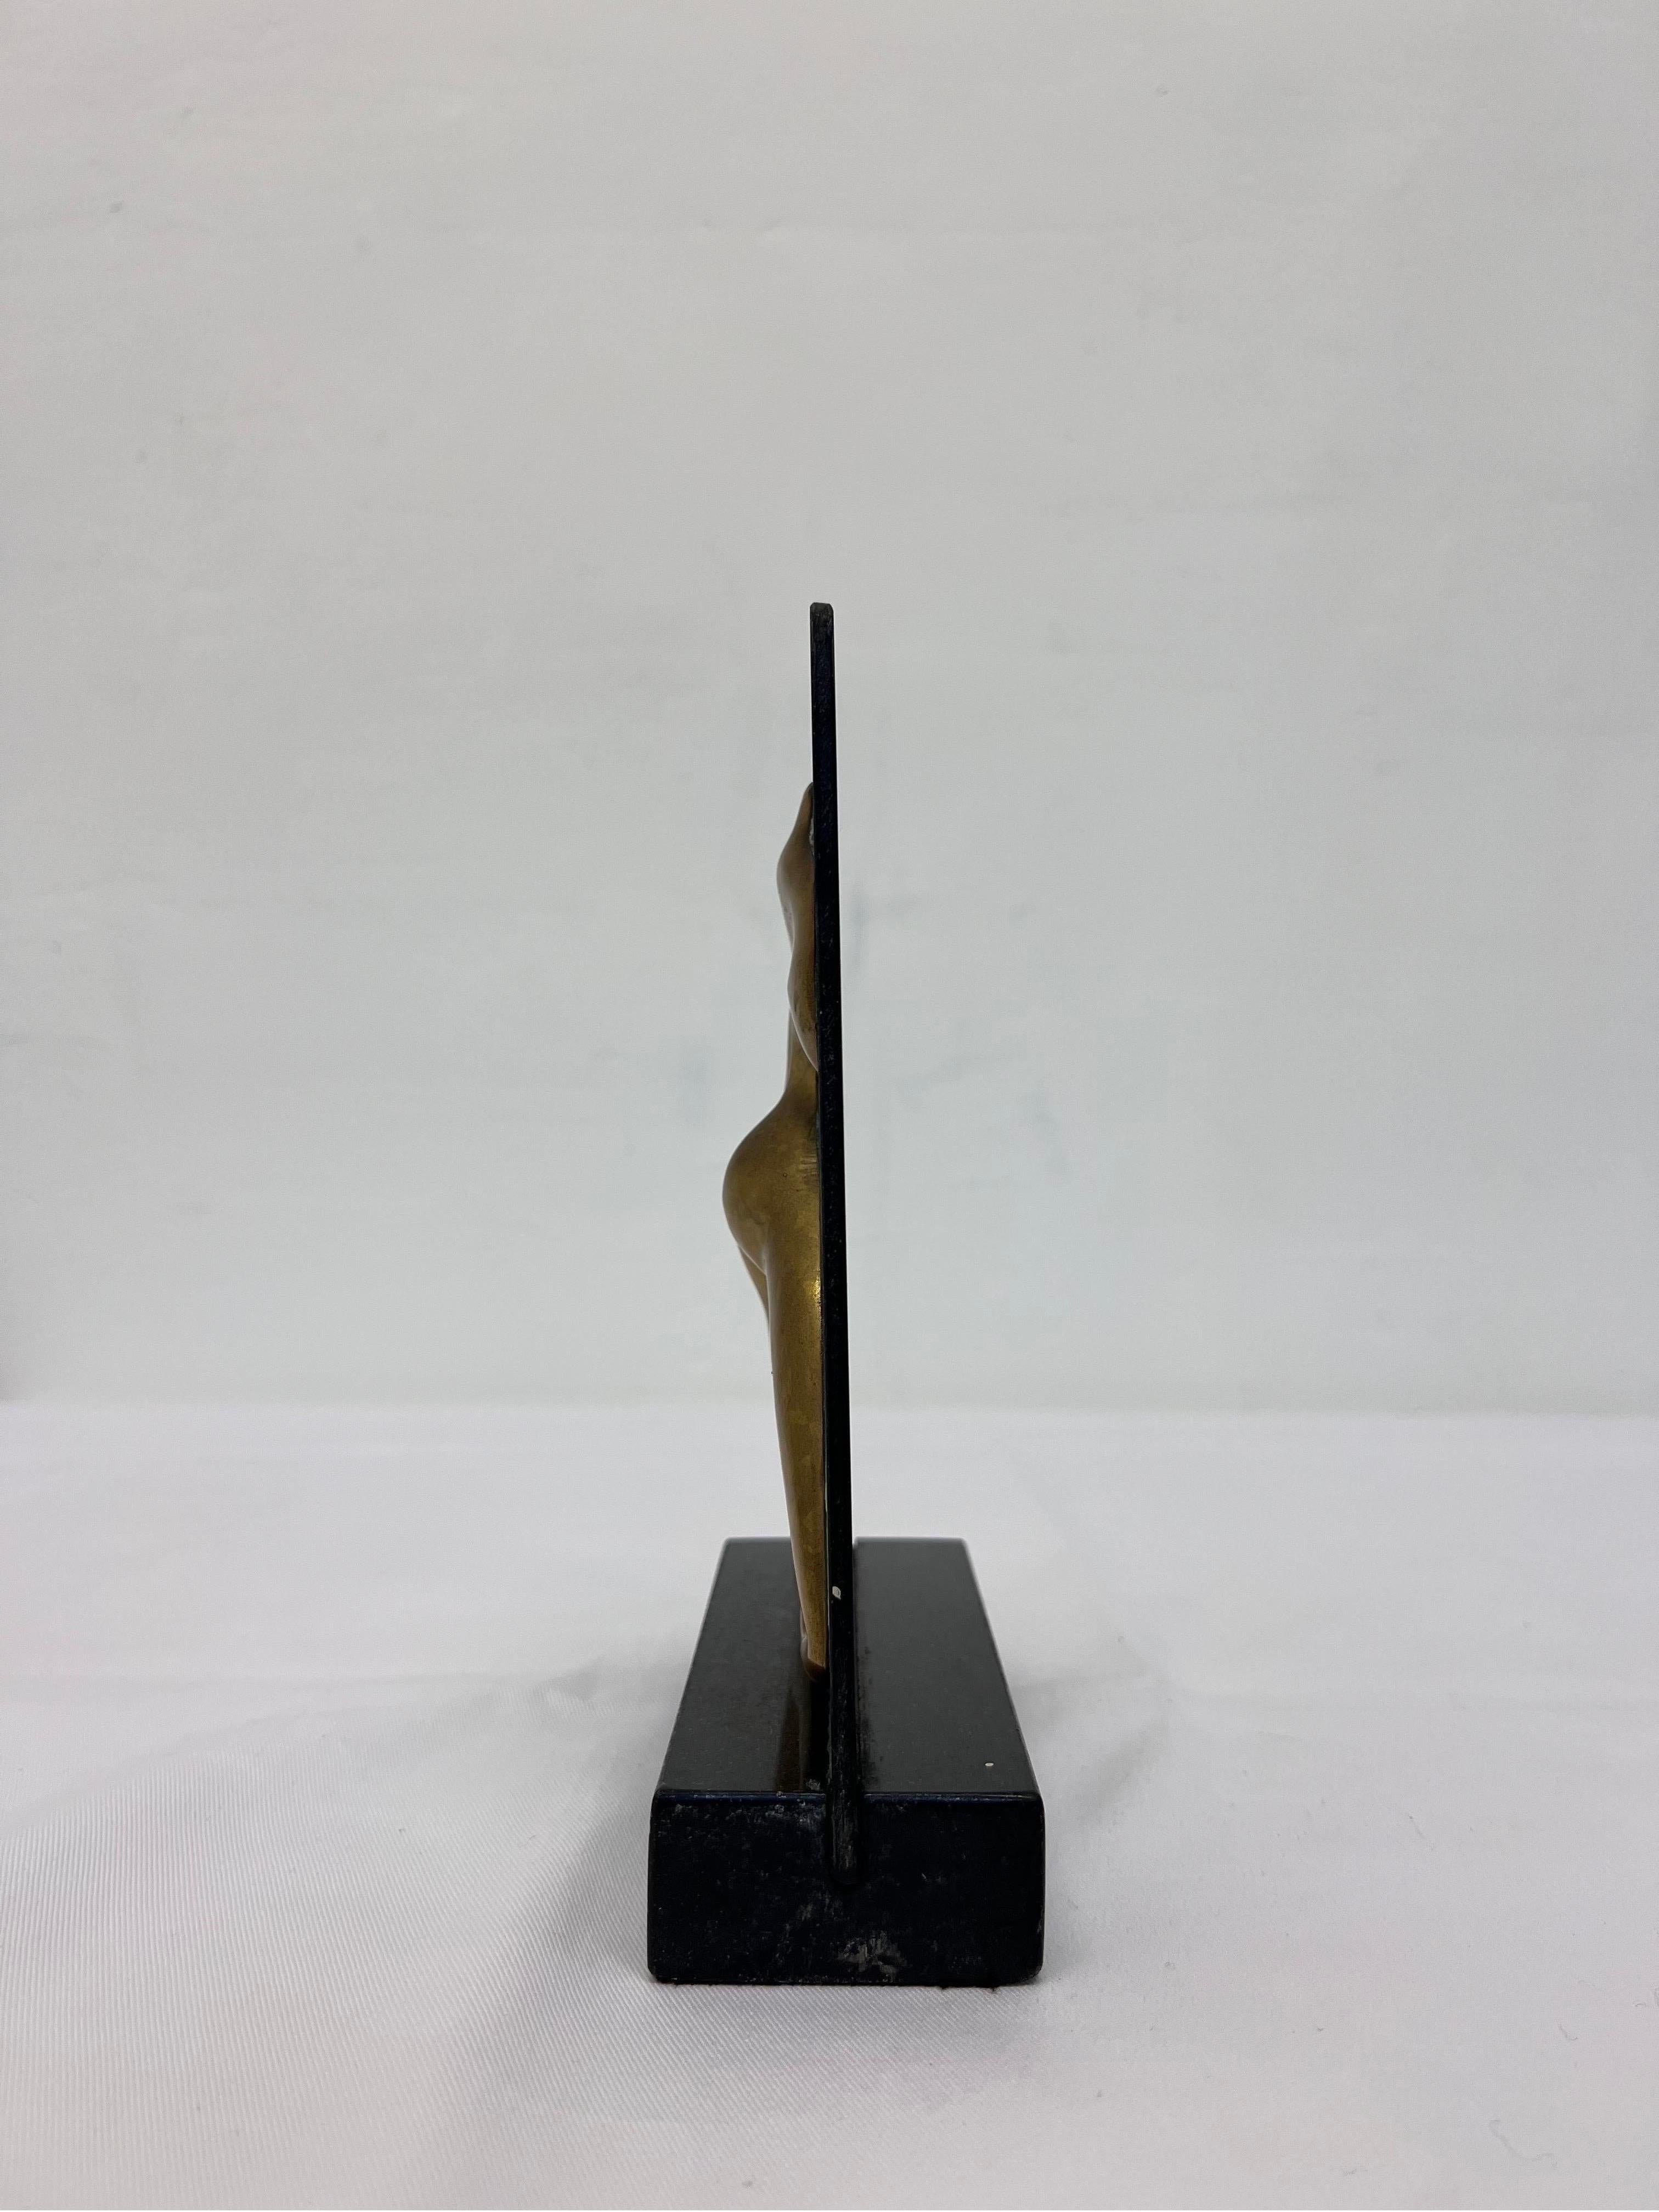 Brazilian Mid-Century Modern Bronze Sculpture on Glass and Granite Base, 1960s For Sale 2